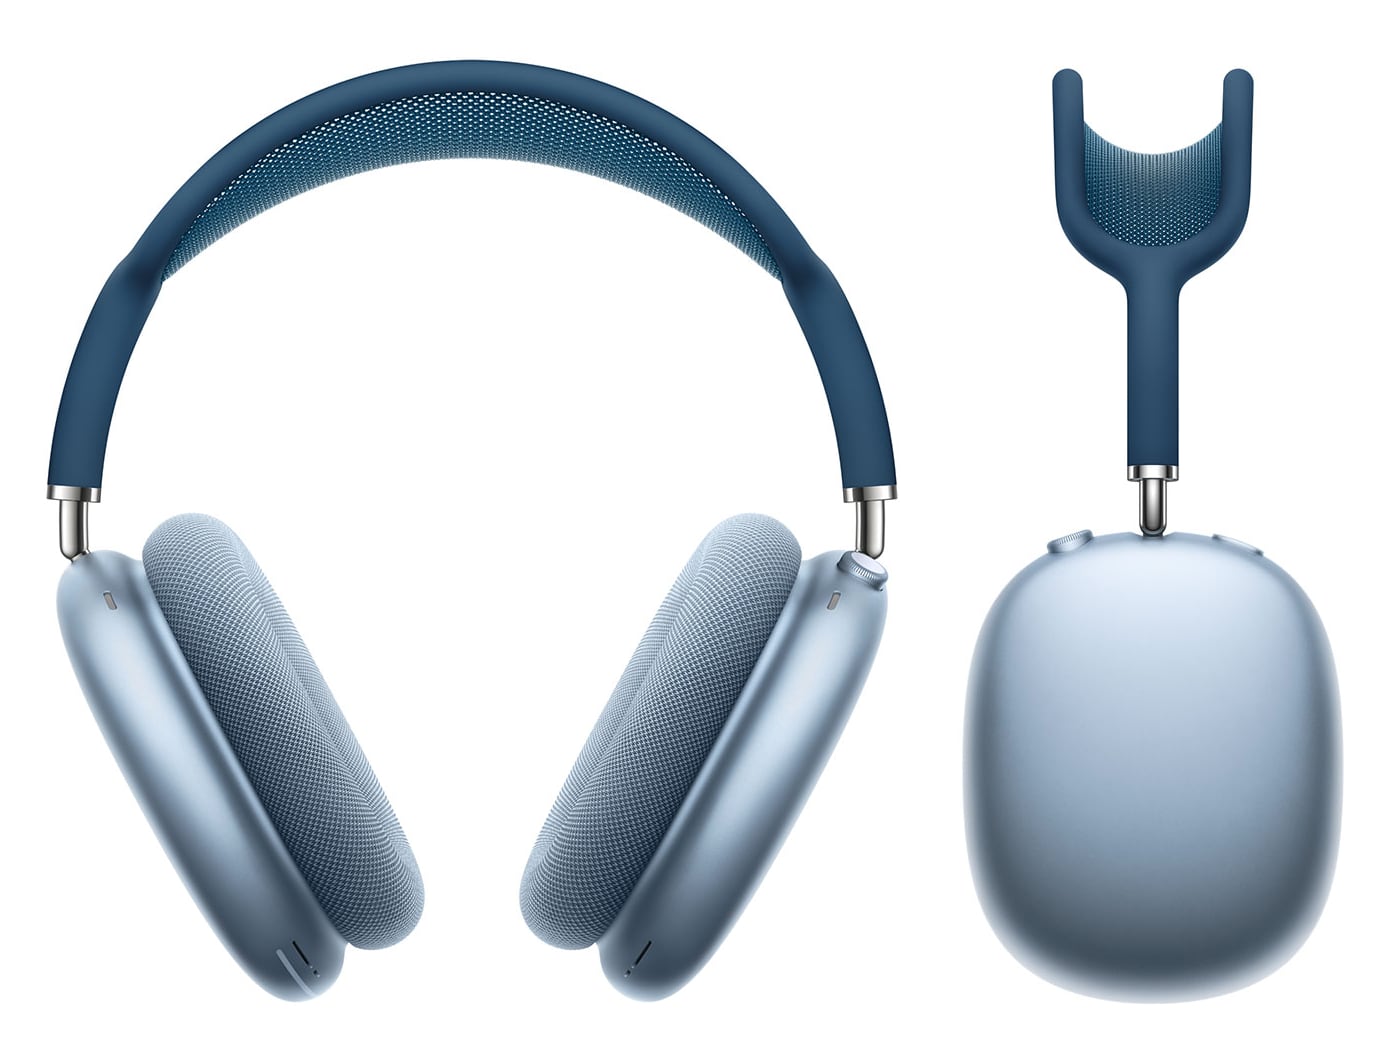 airpods max in blue